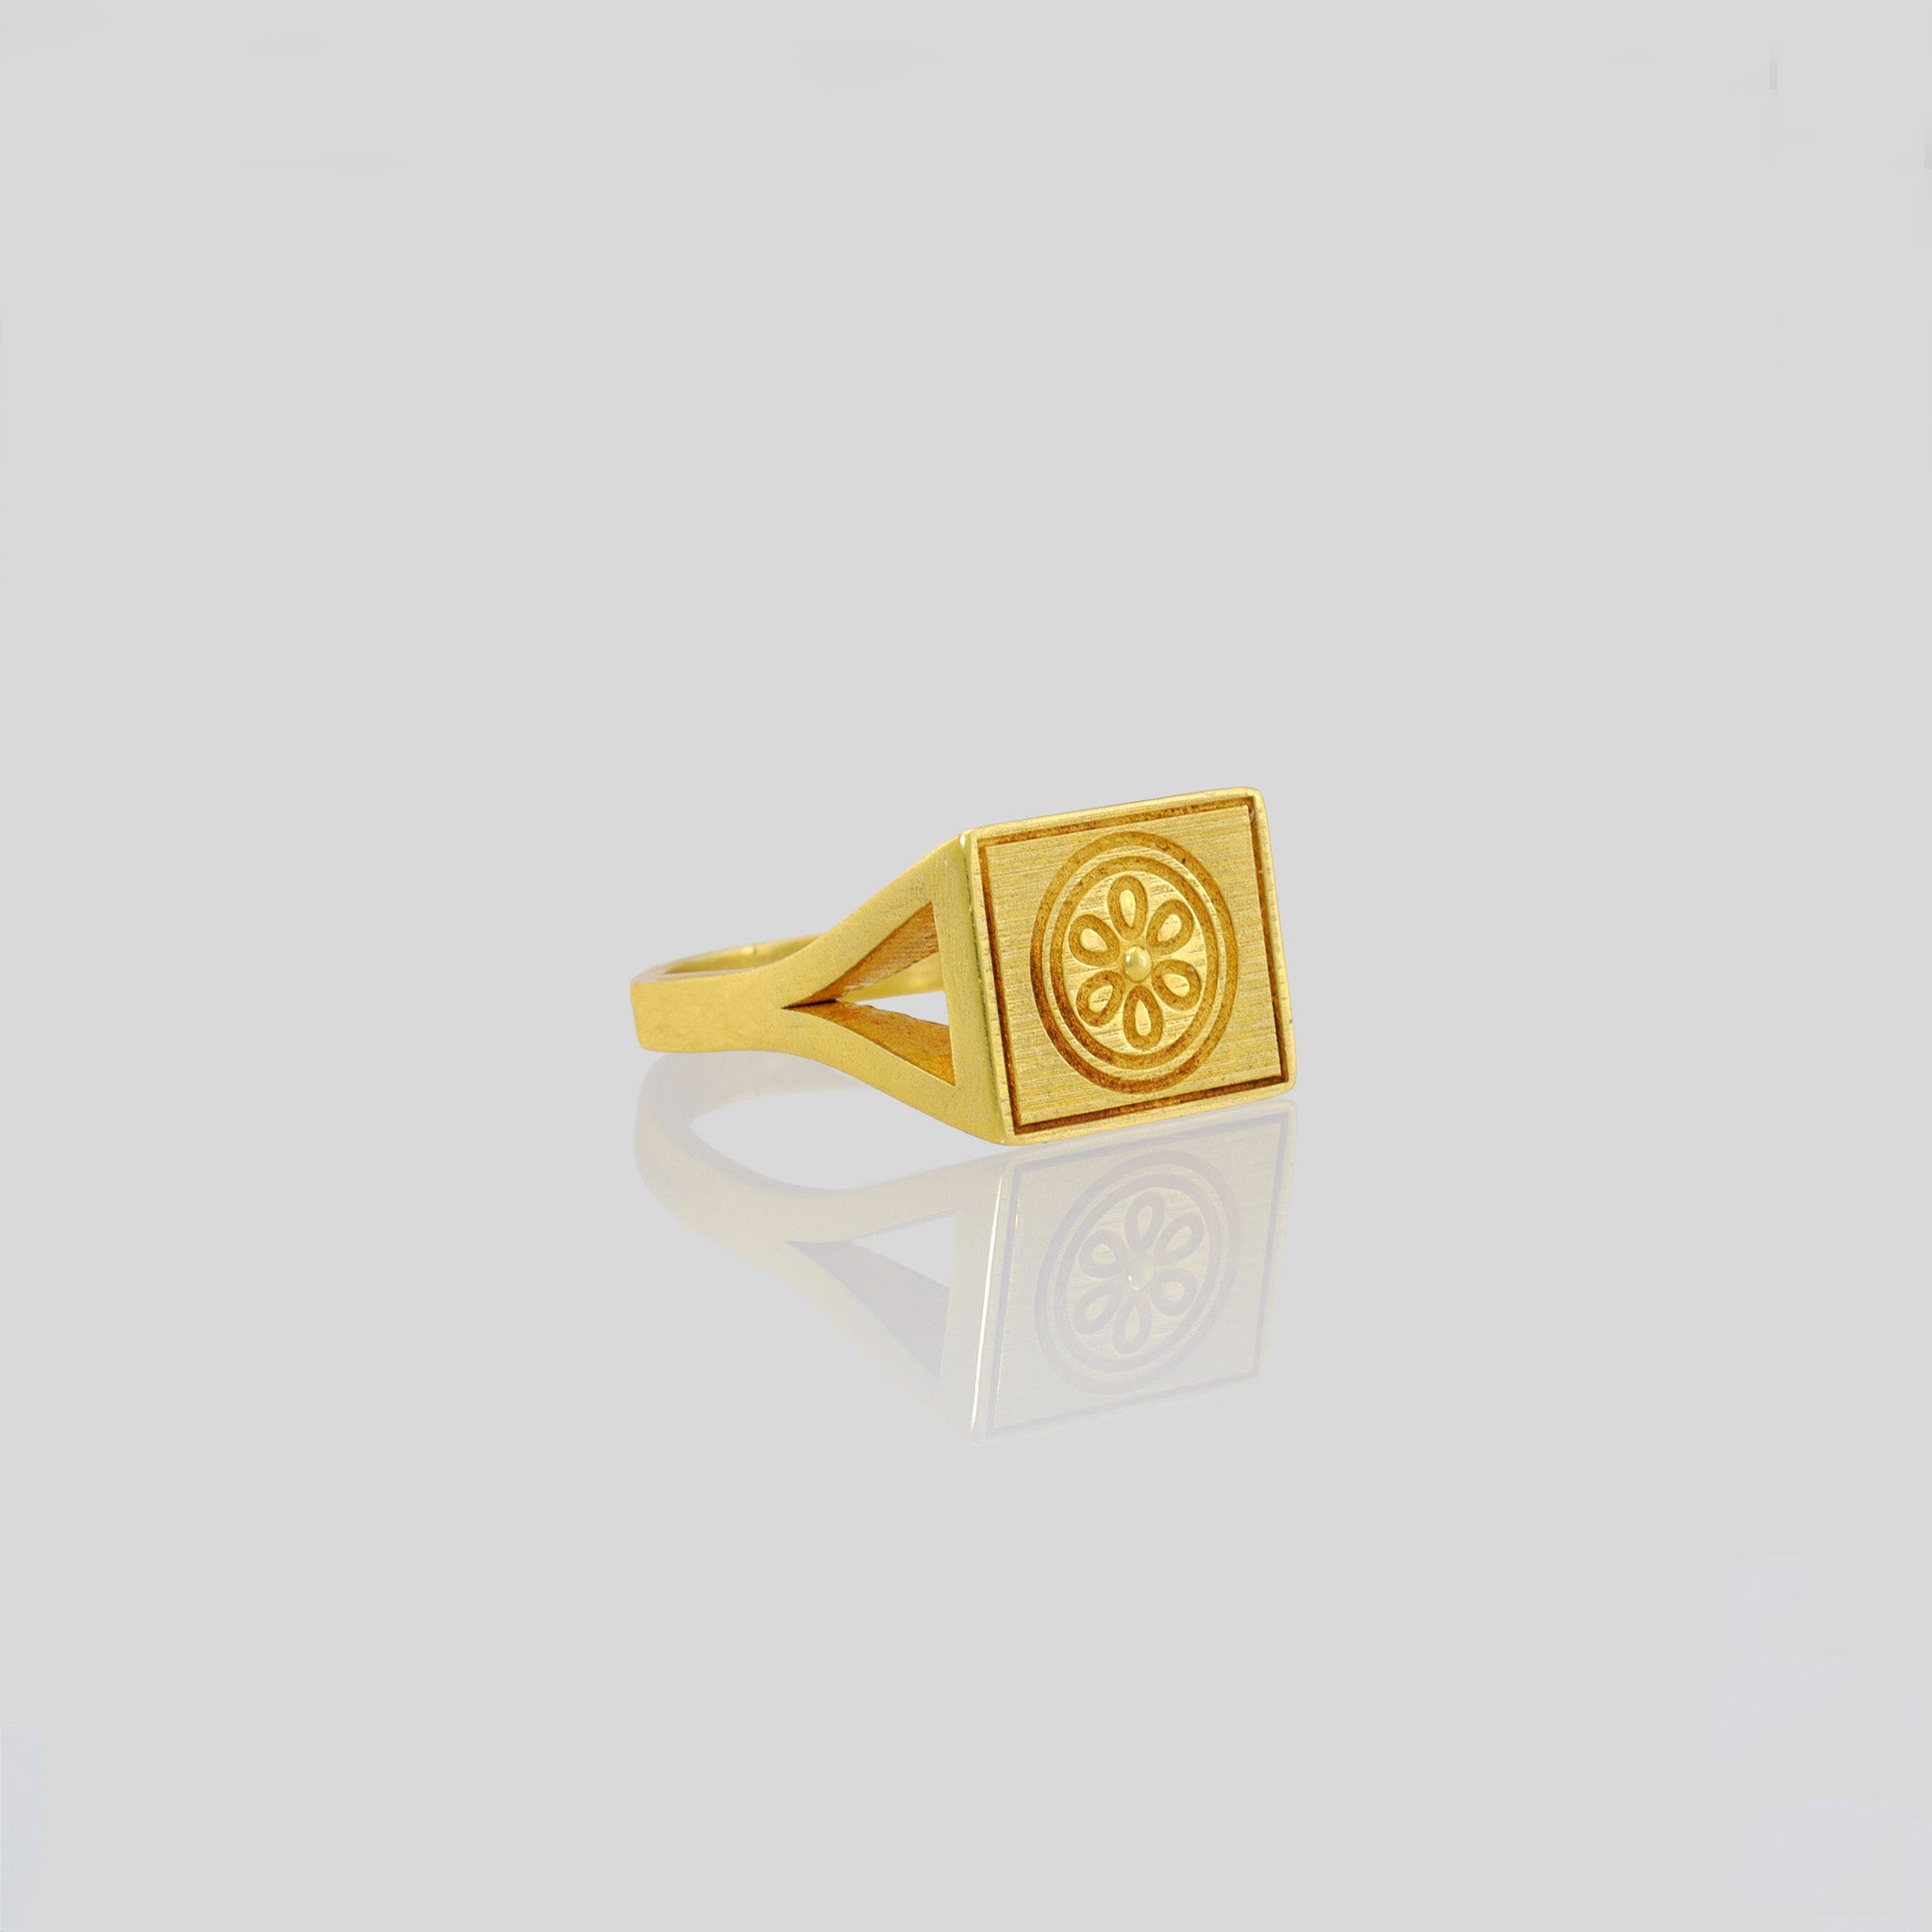 Elegant 18k gold signet ring with a square top featuring an embossed flower design, showcased against a reflective white background.